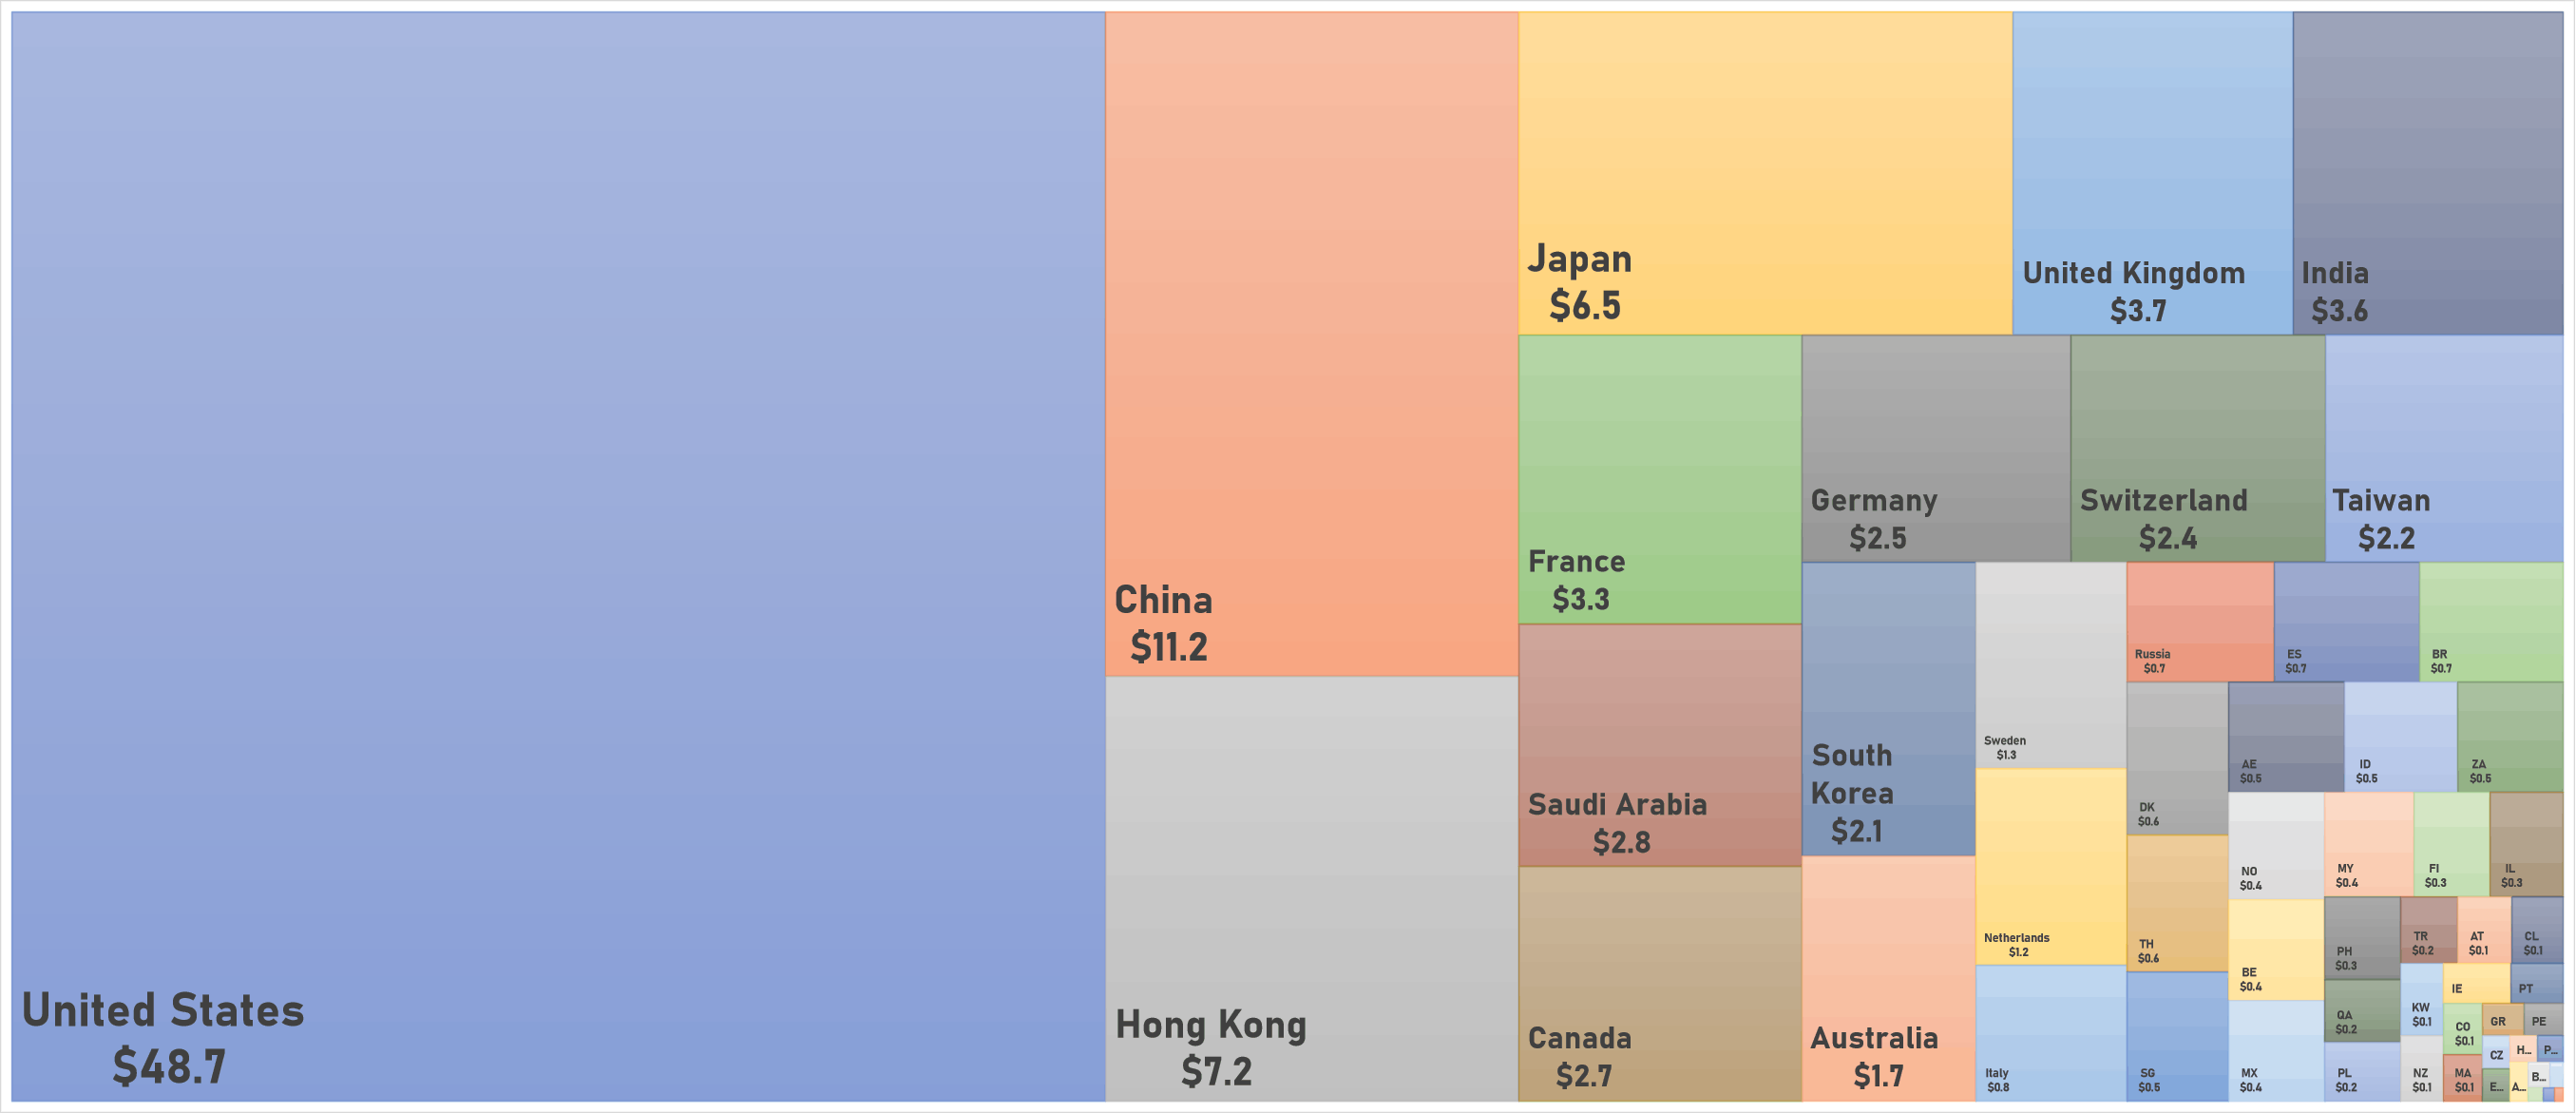 World Market Capitalization By Country | Sources: phipost.com, FactSet data